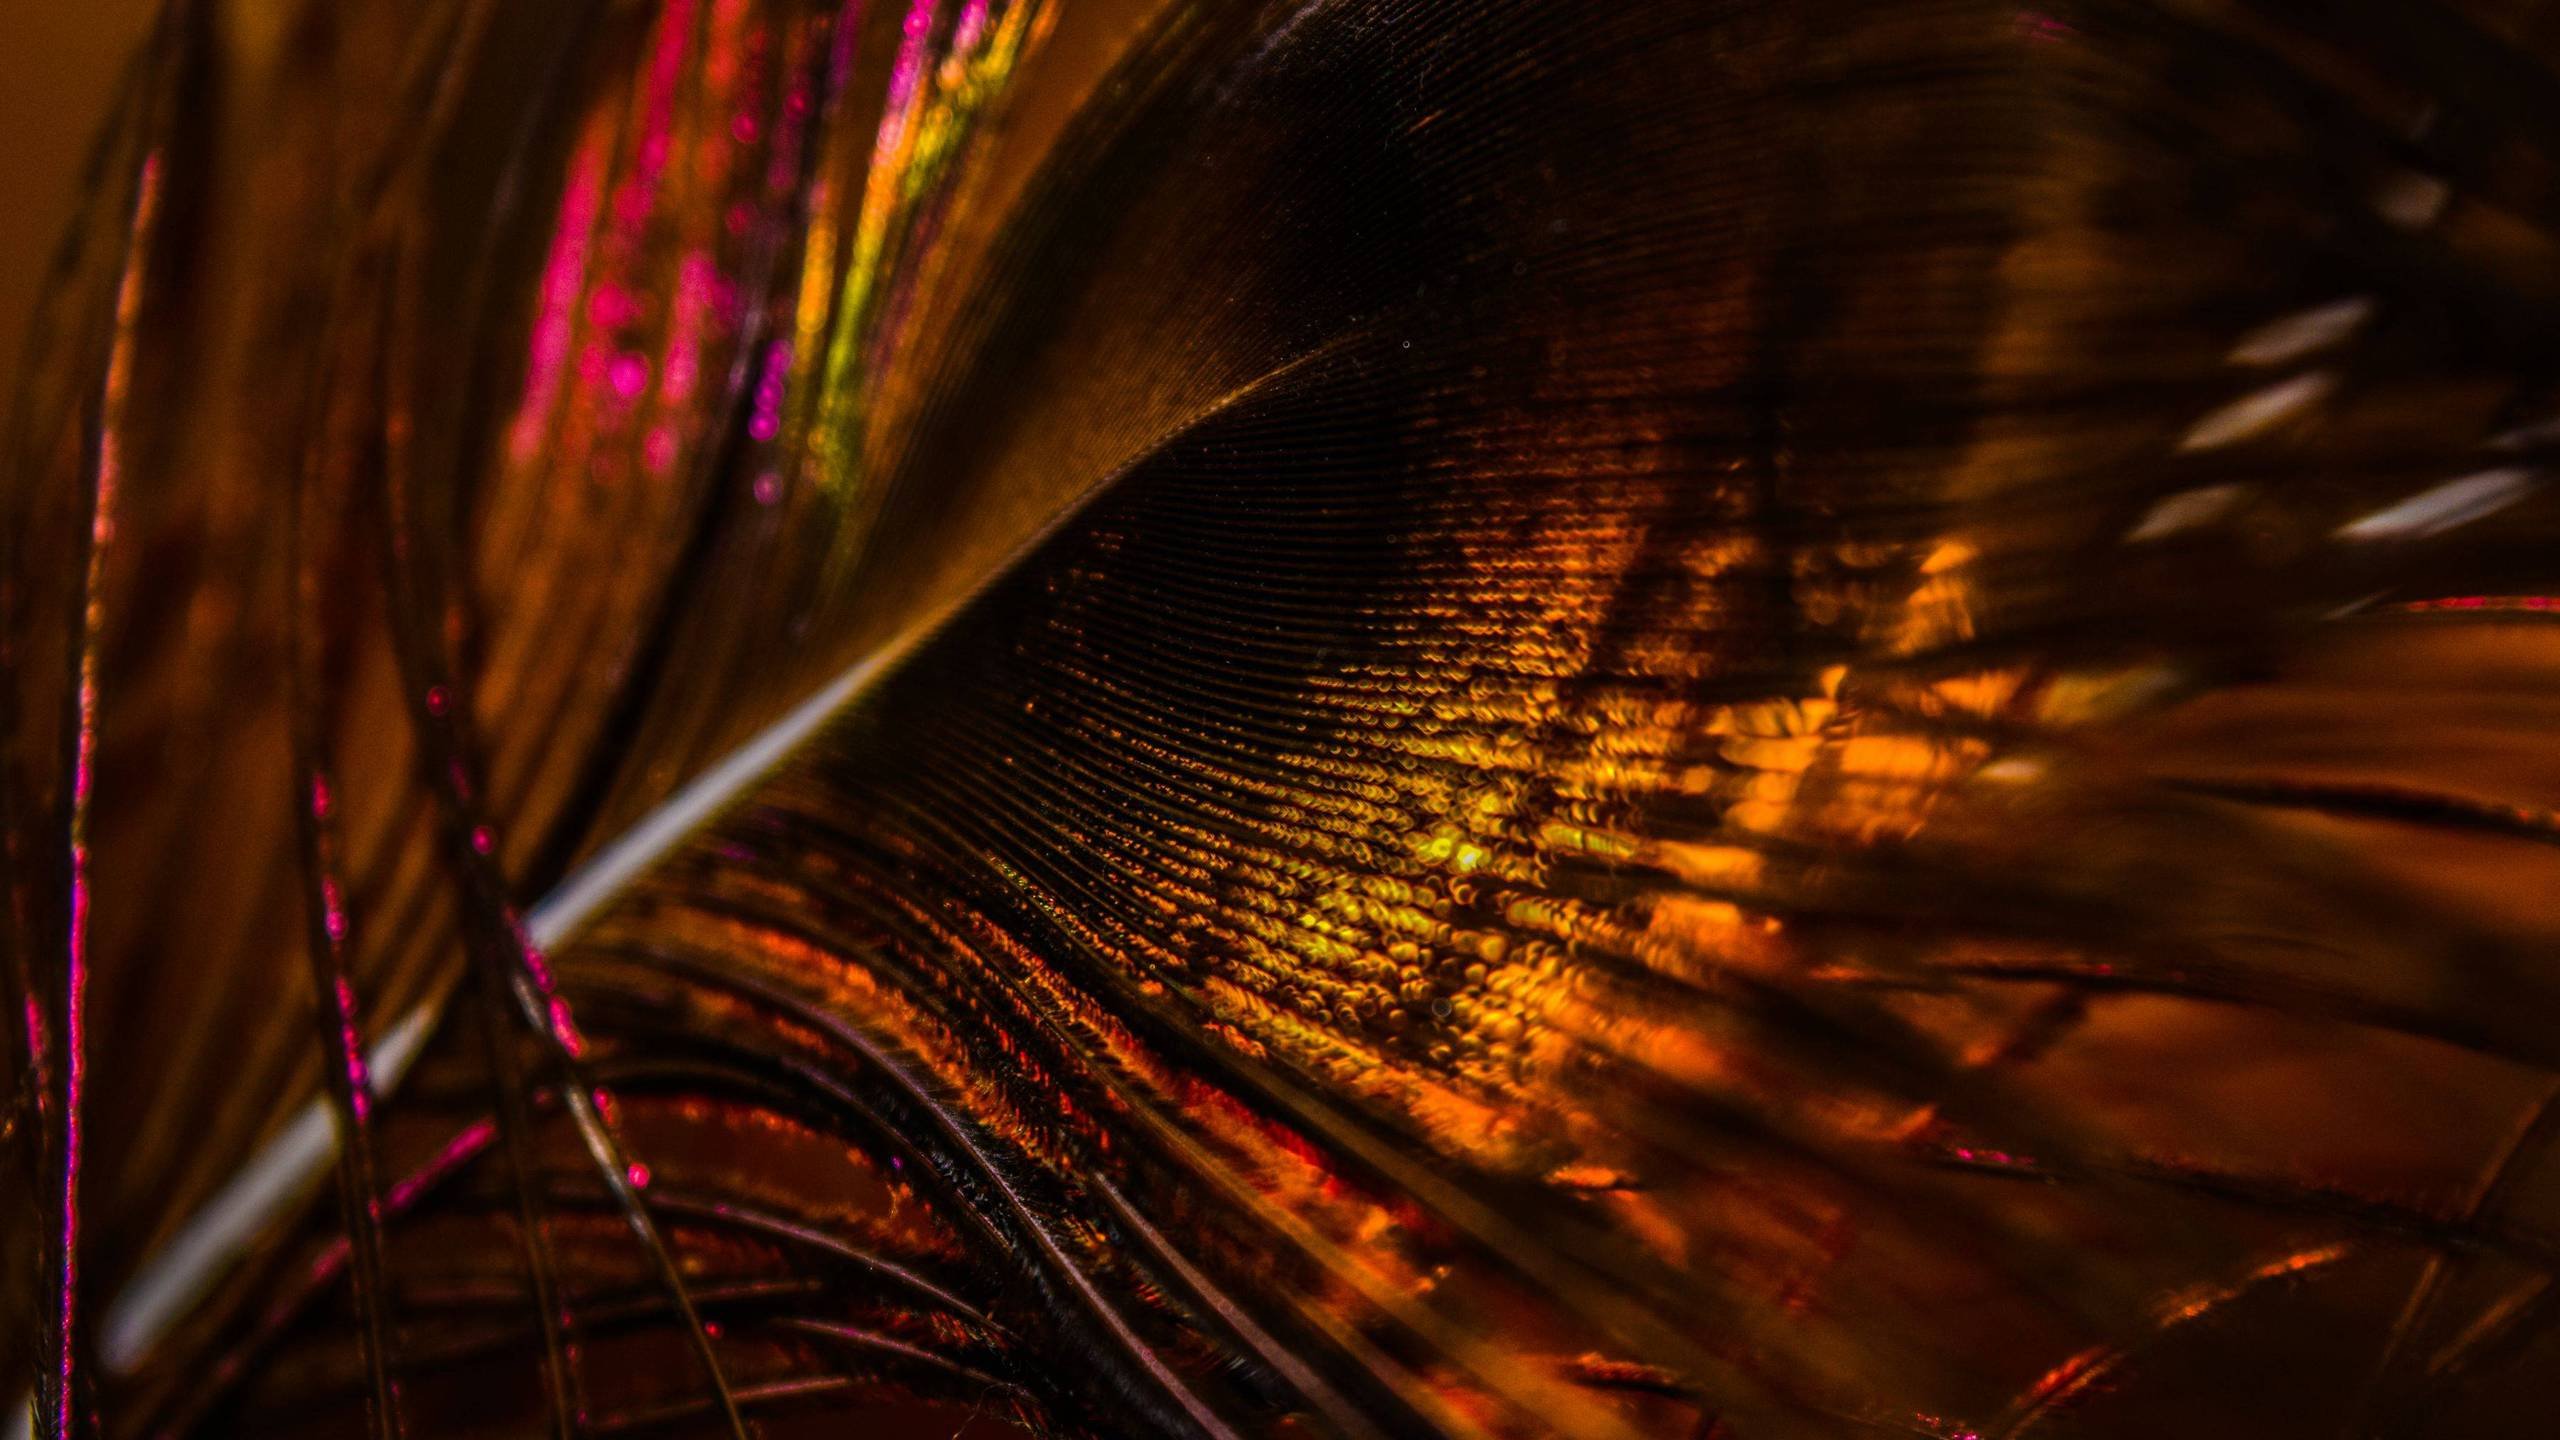 Feather 4K wallpapers for your desktop or mobile screen free and easy to  download